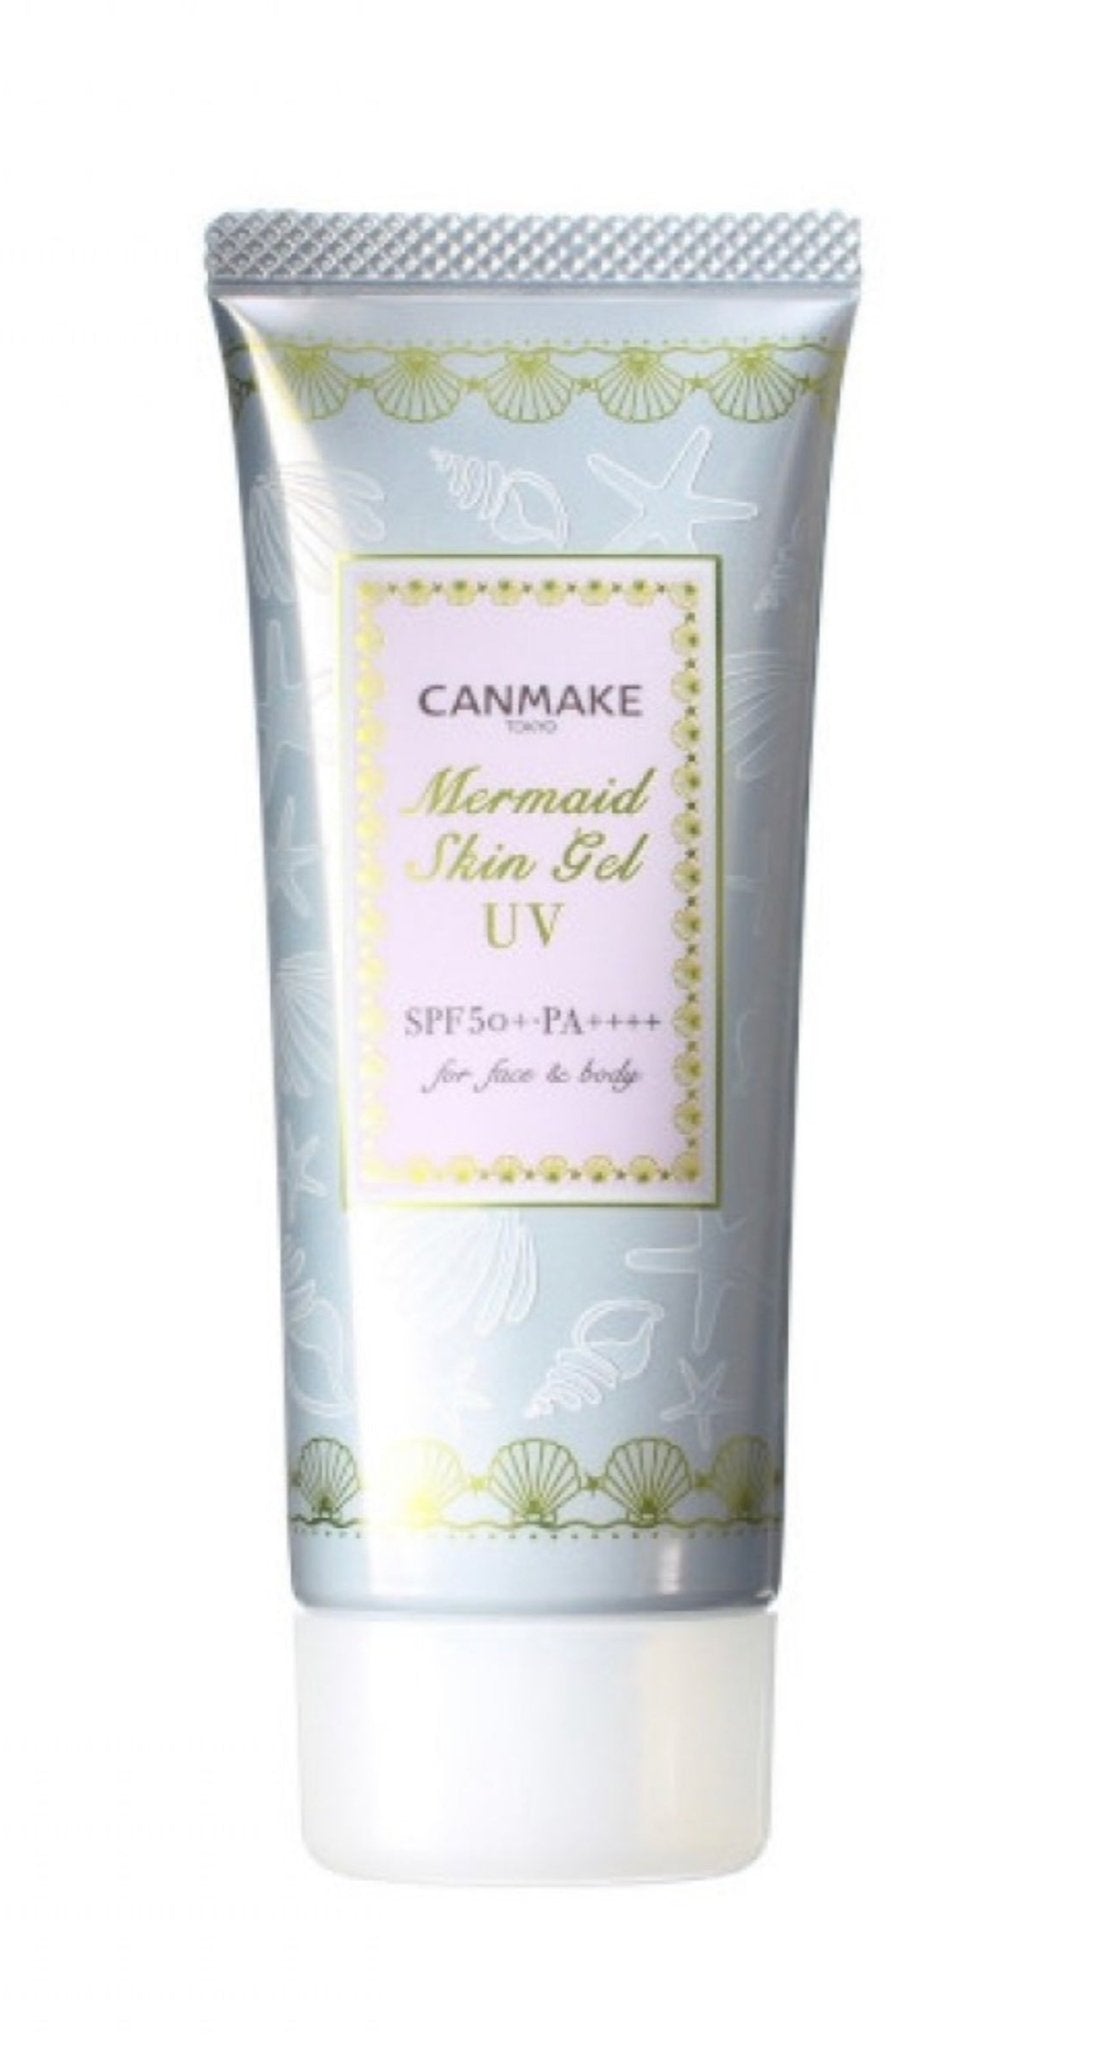 Canmake - Clear 01 Mermaid Skin Gel UV SPF 50+ PA 40g - The Face Method